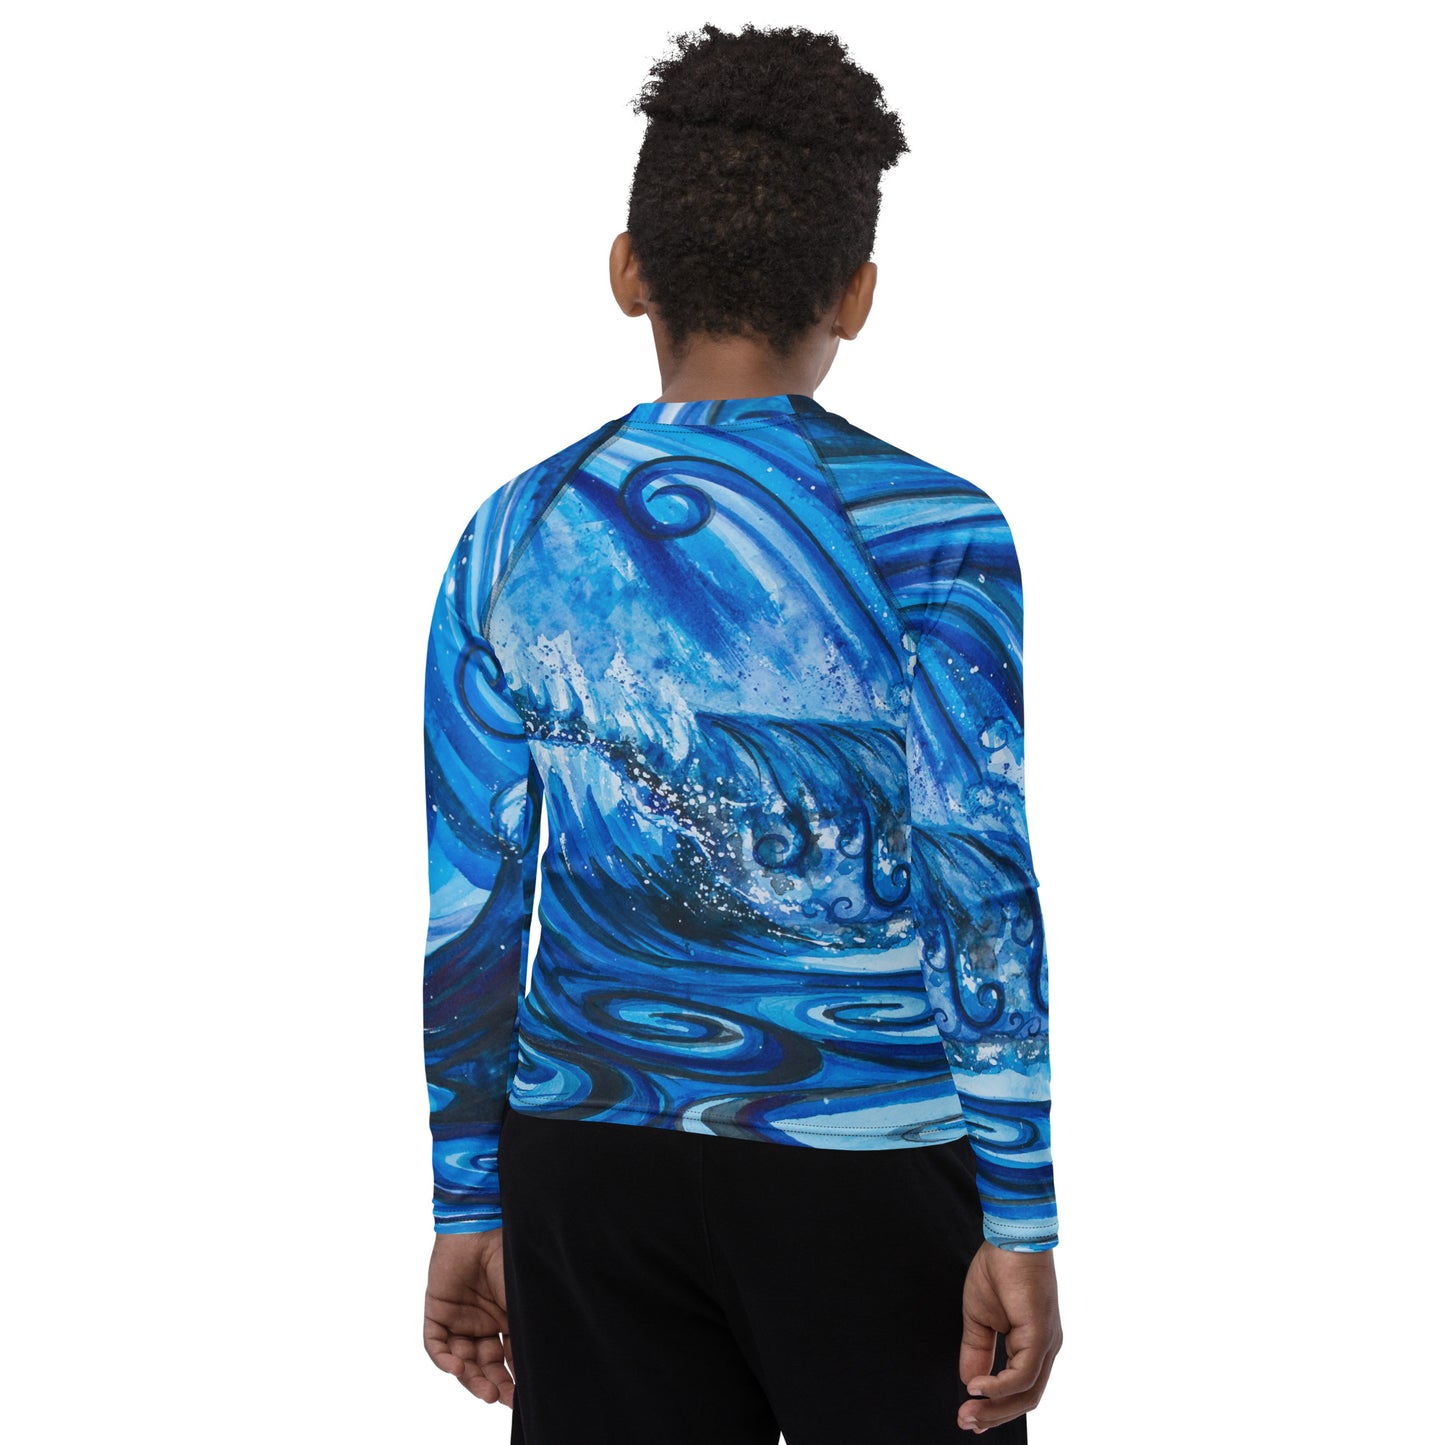 "Out Of The Blue" Youth Rash Guard